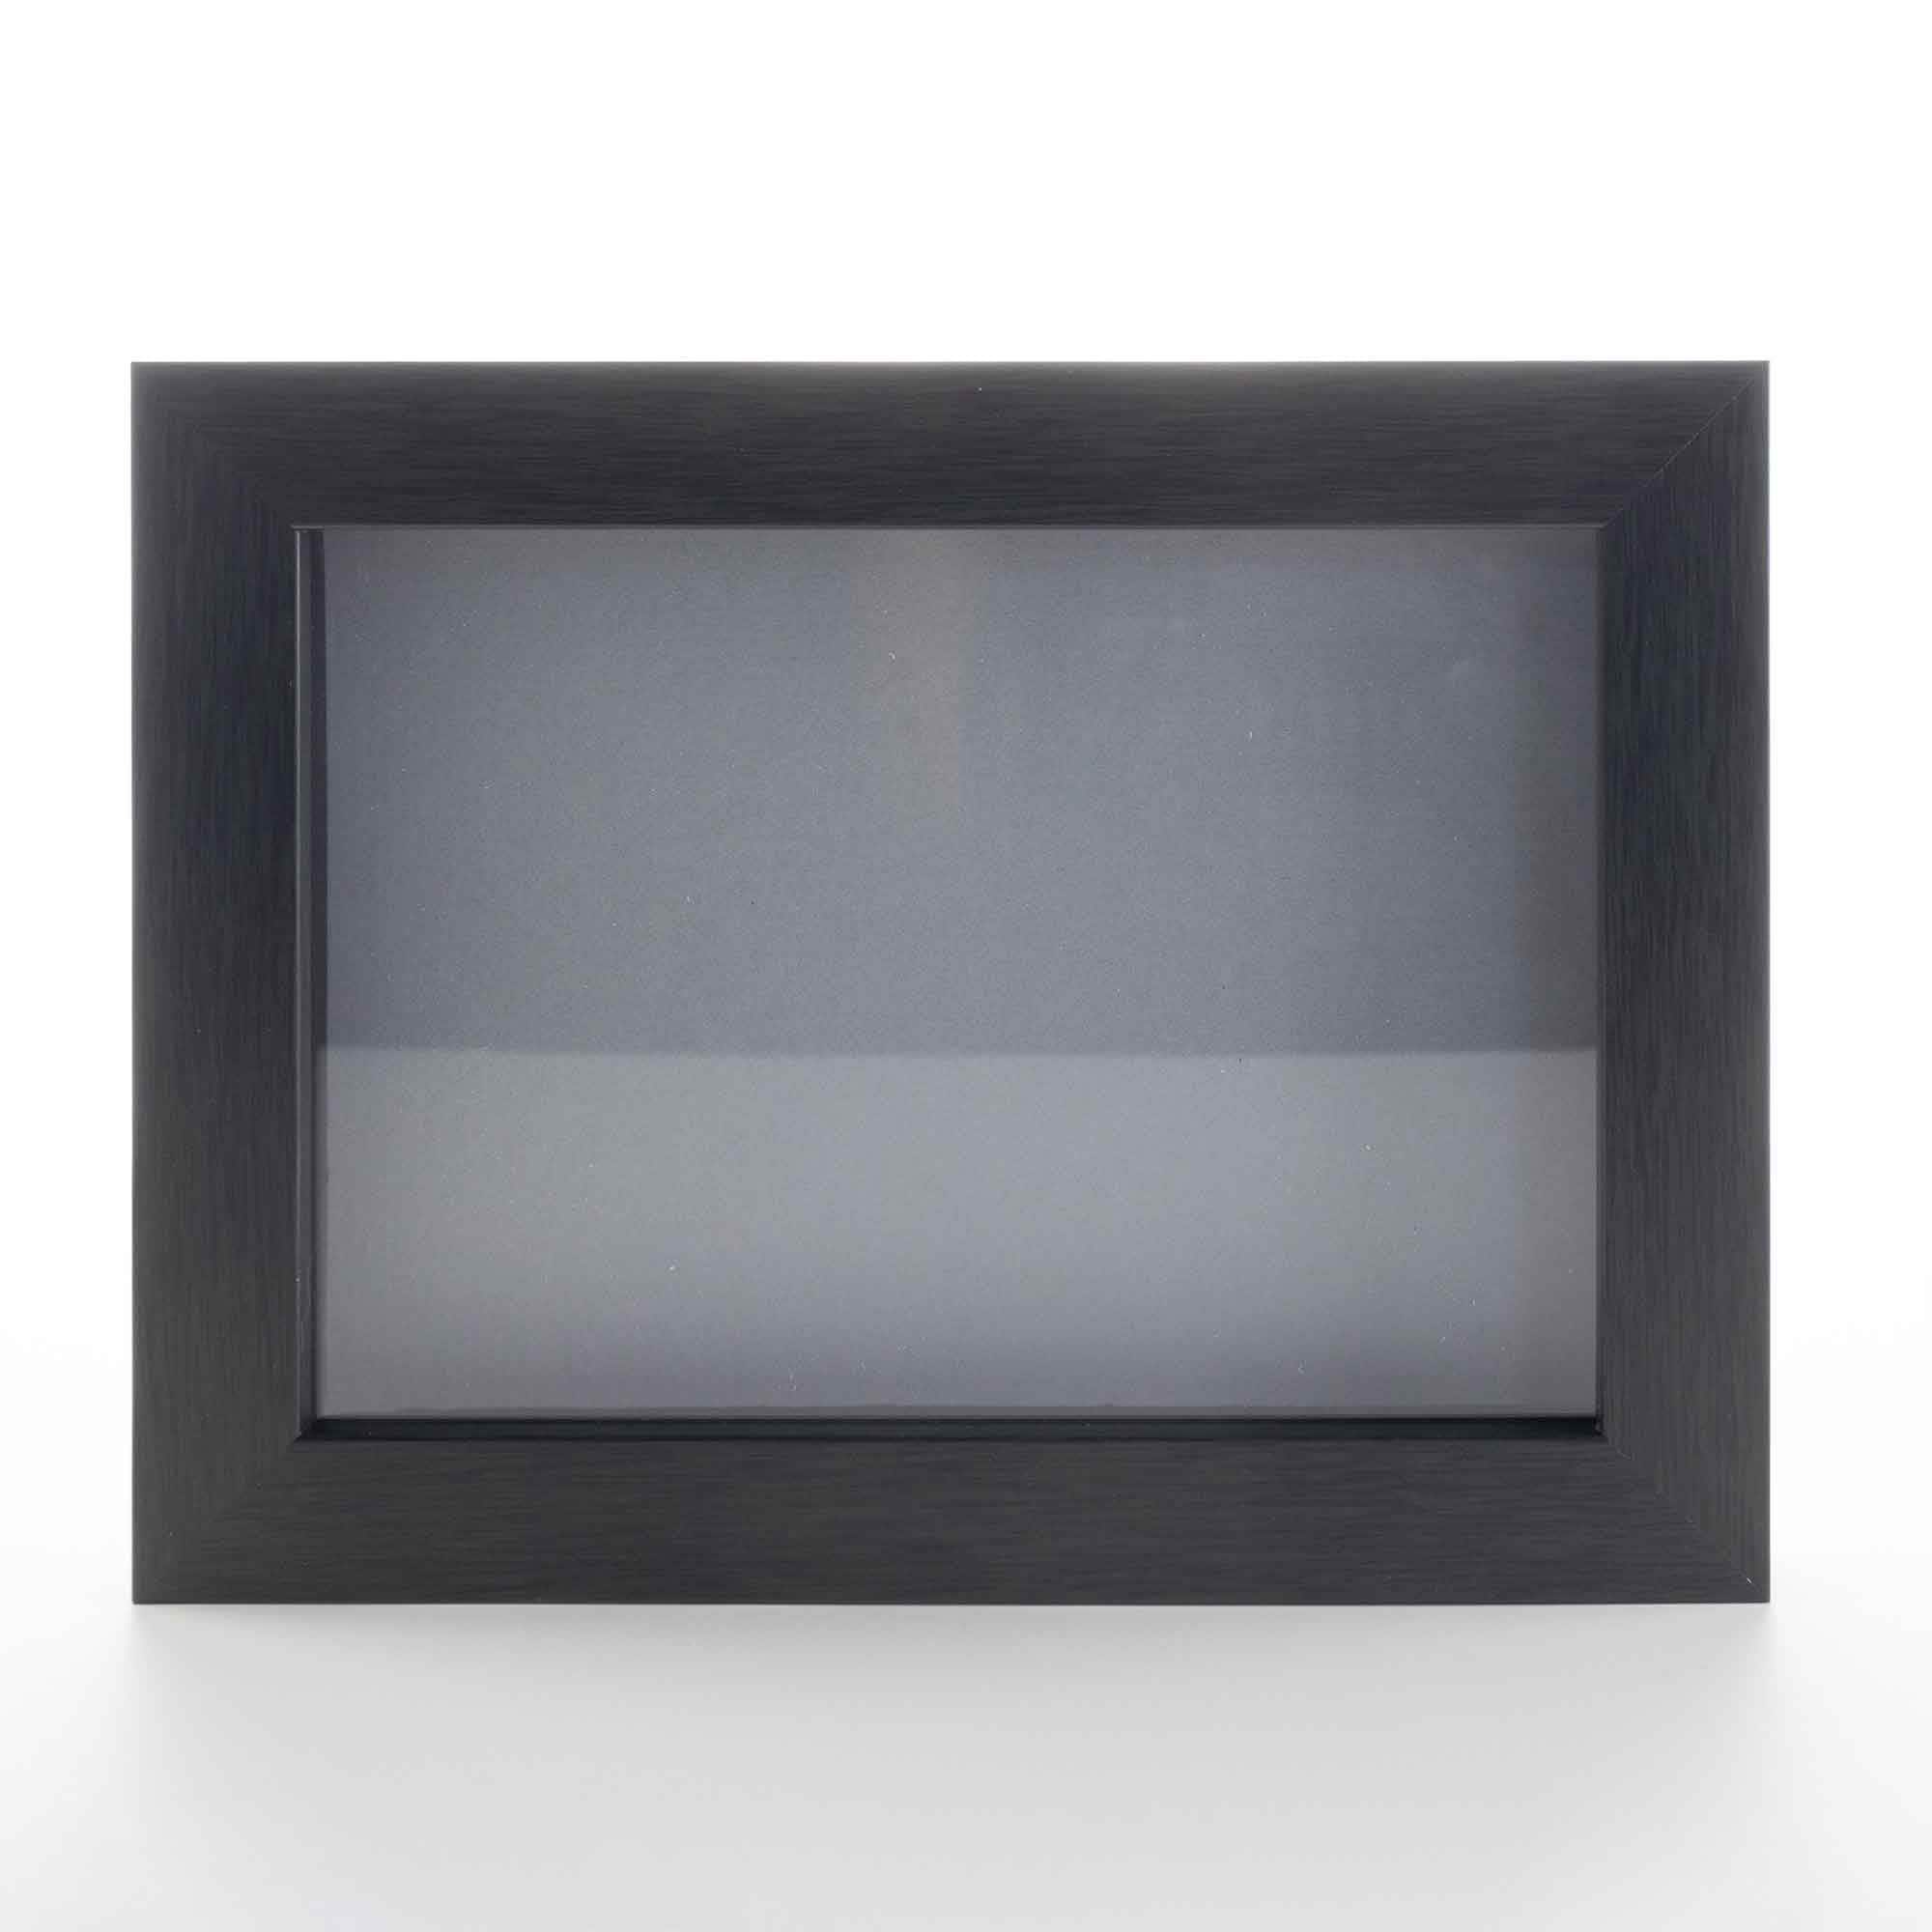 CustomPictureFrames.com 8x8 Shadow Box Frame Painted White Real Wood with A Silver Acid-Free Backing | 3/4 of Usuable Depth | UV Resistant Acrylic